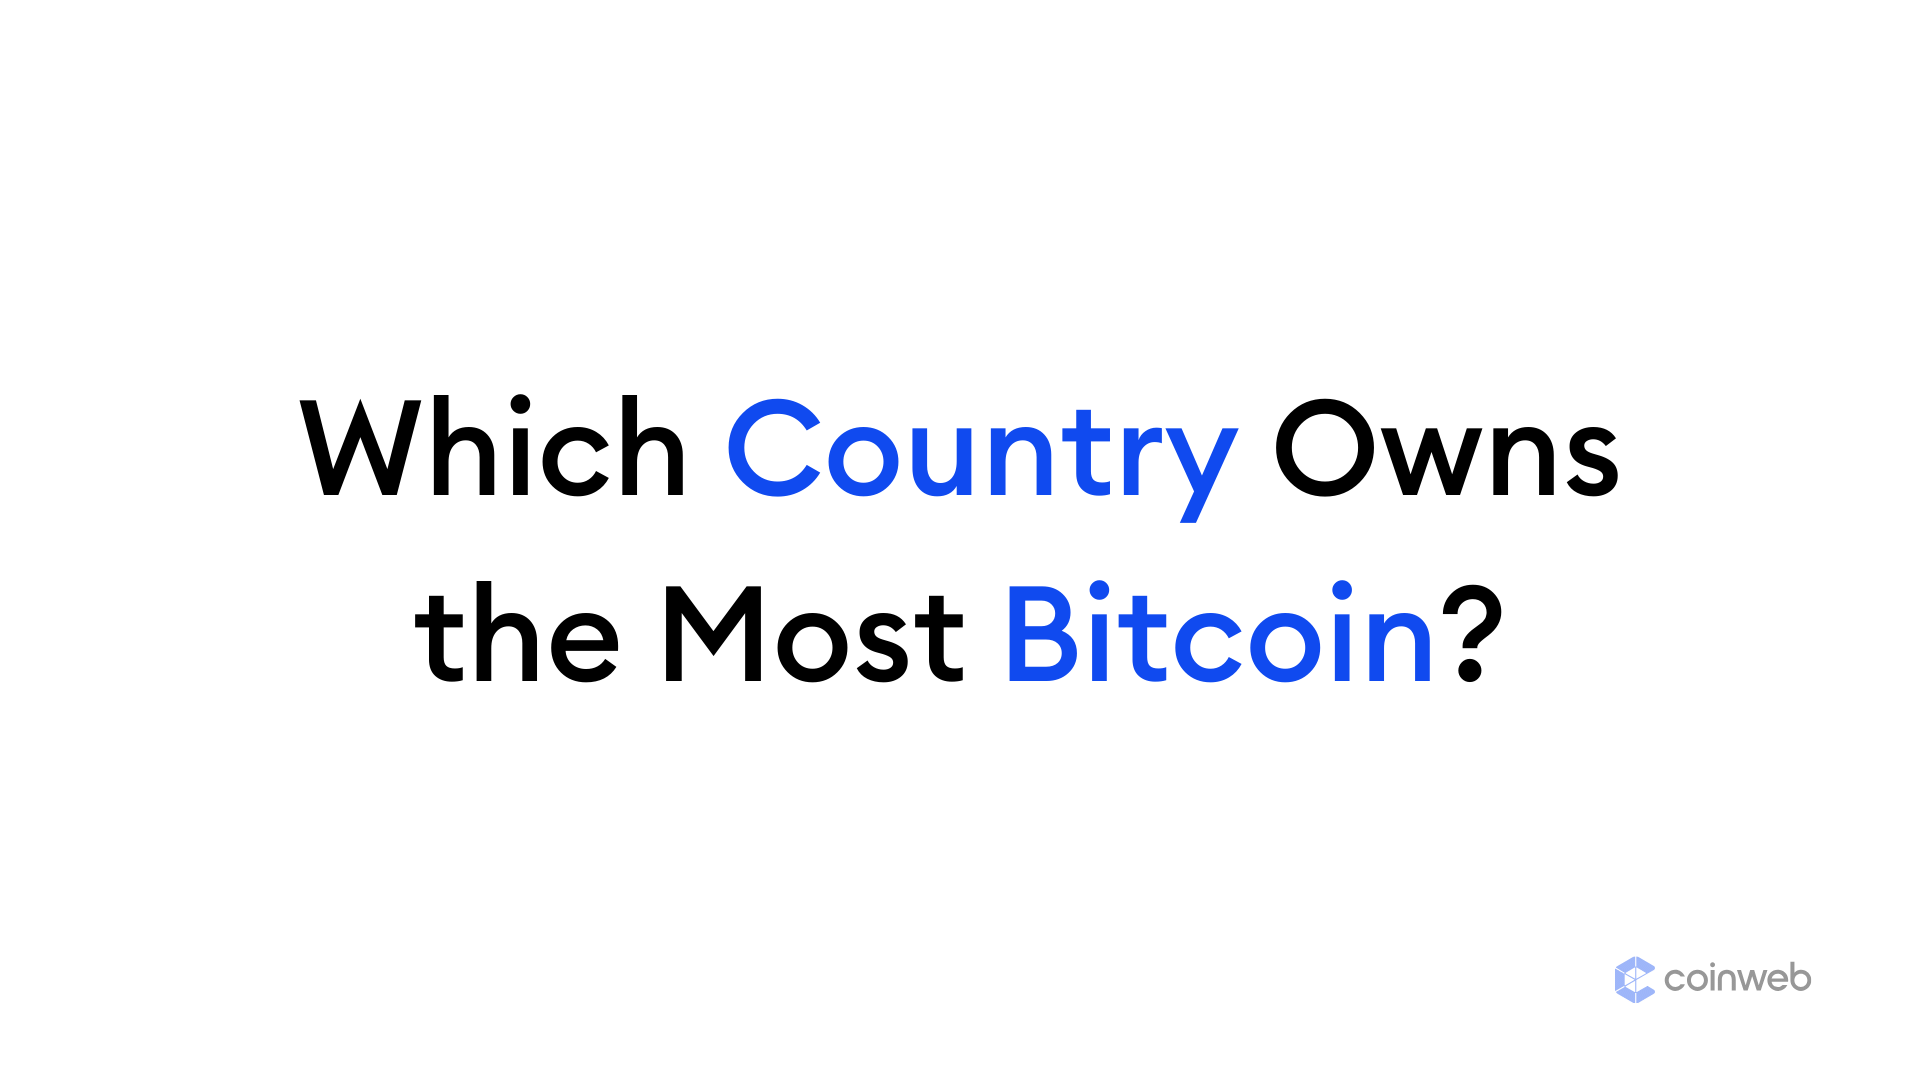 which country owns the most bitcoin